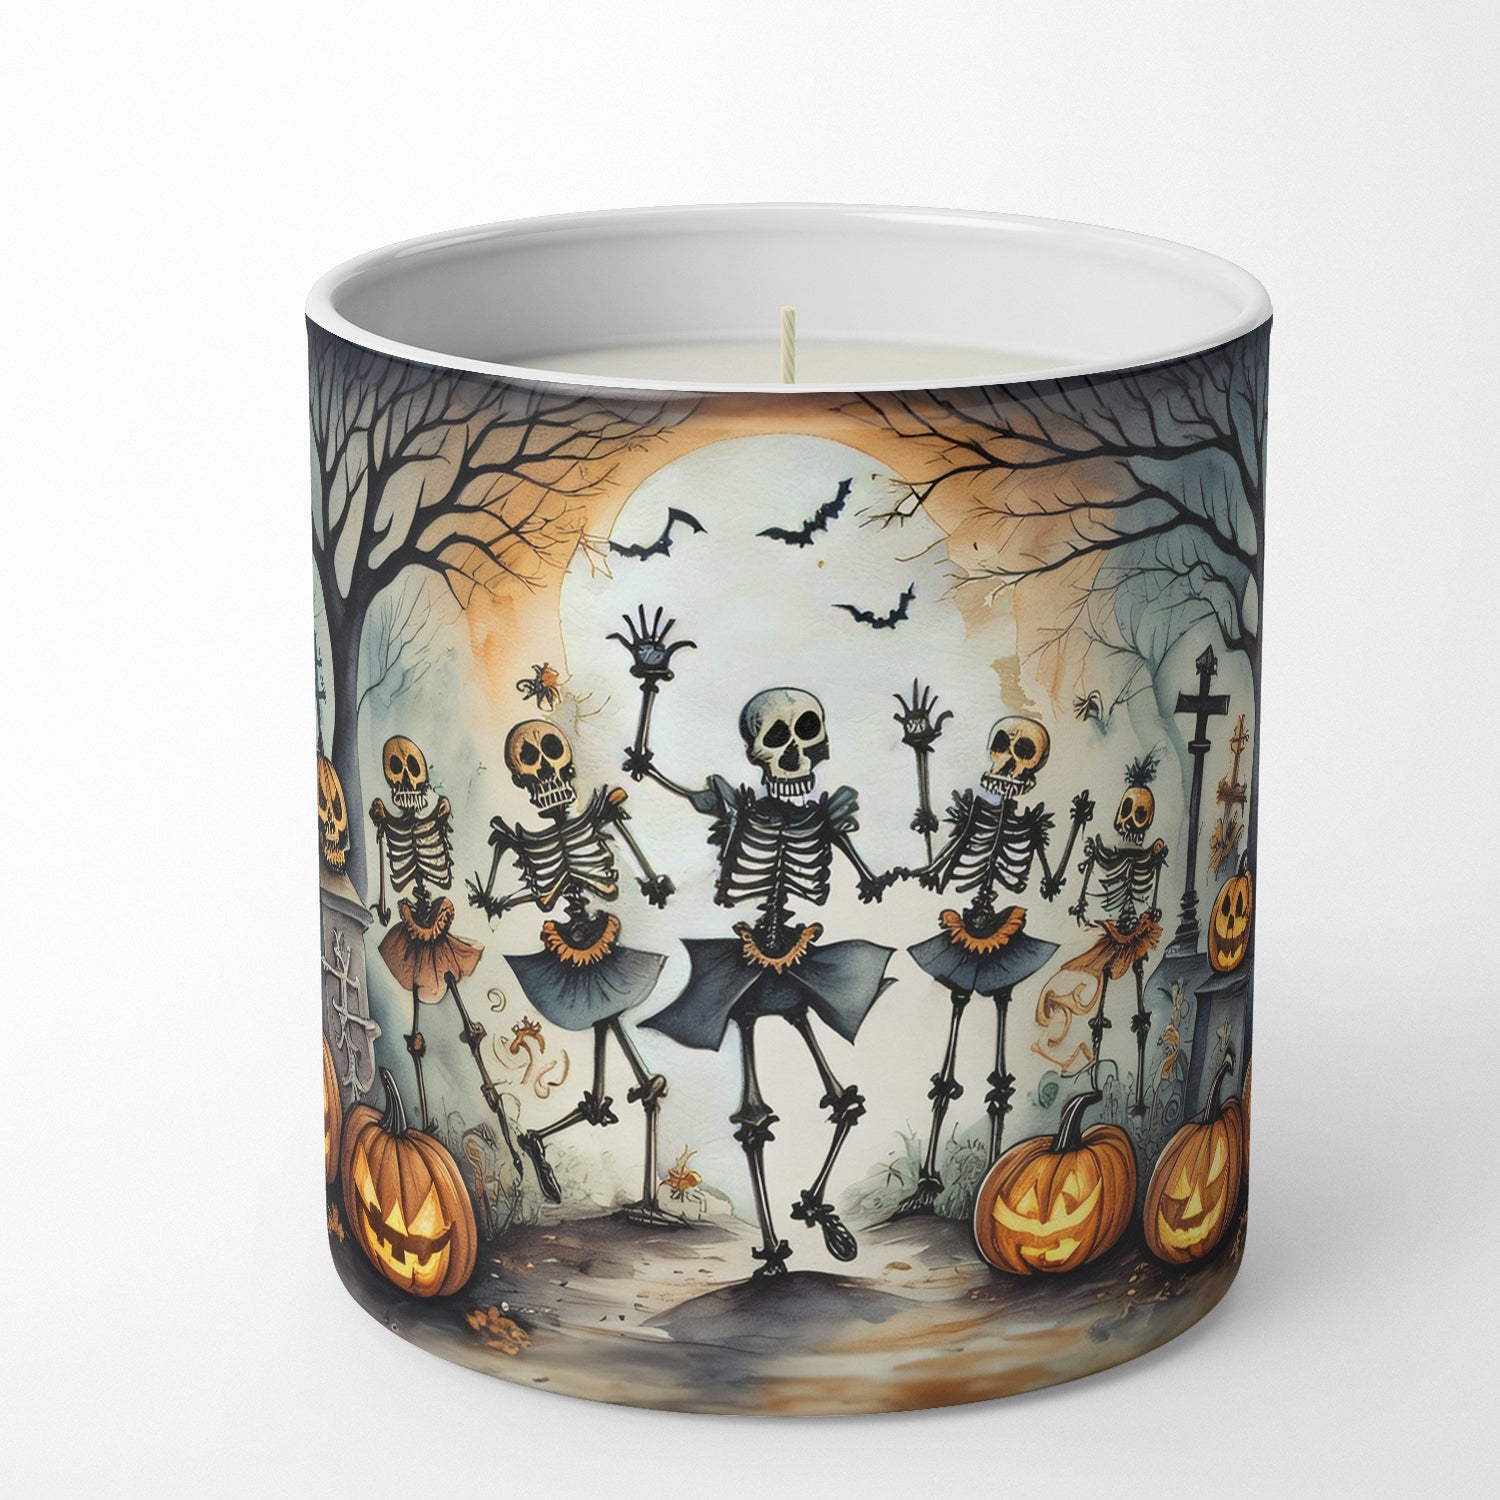 Buy this Dancing Skeletons Spooky Halloween Decorative Soy Candle